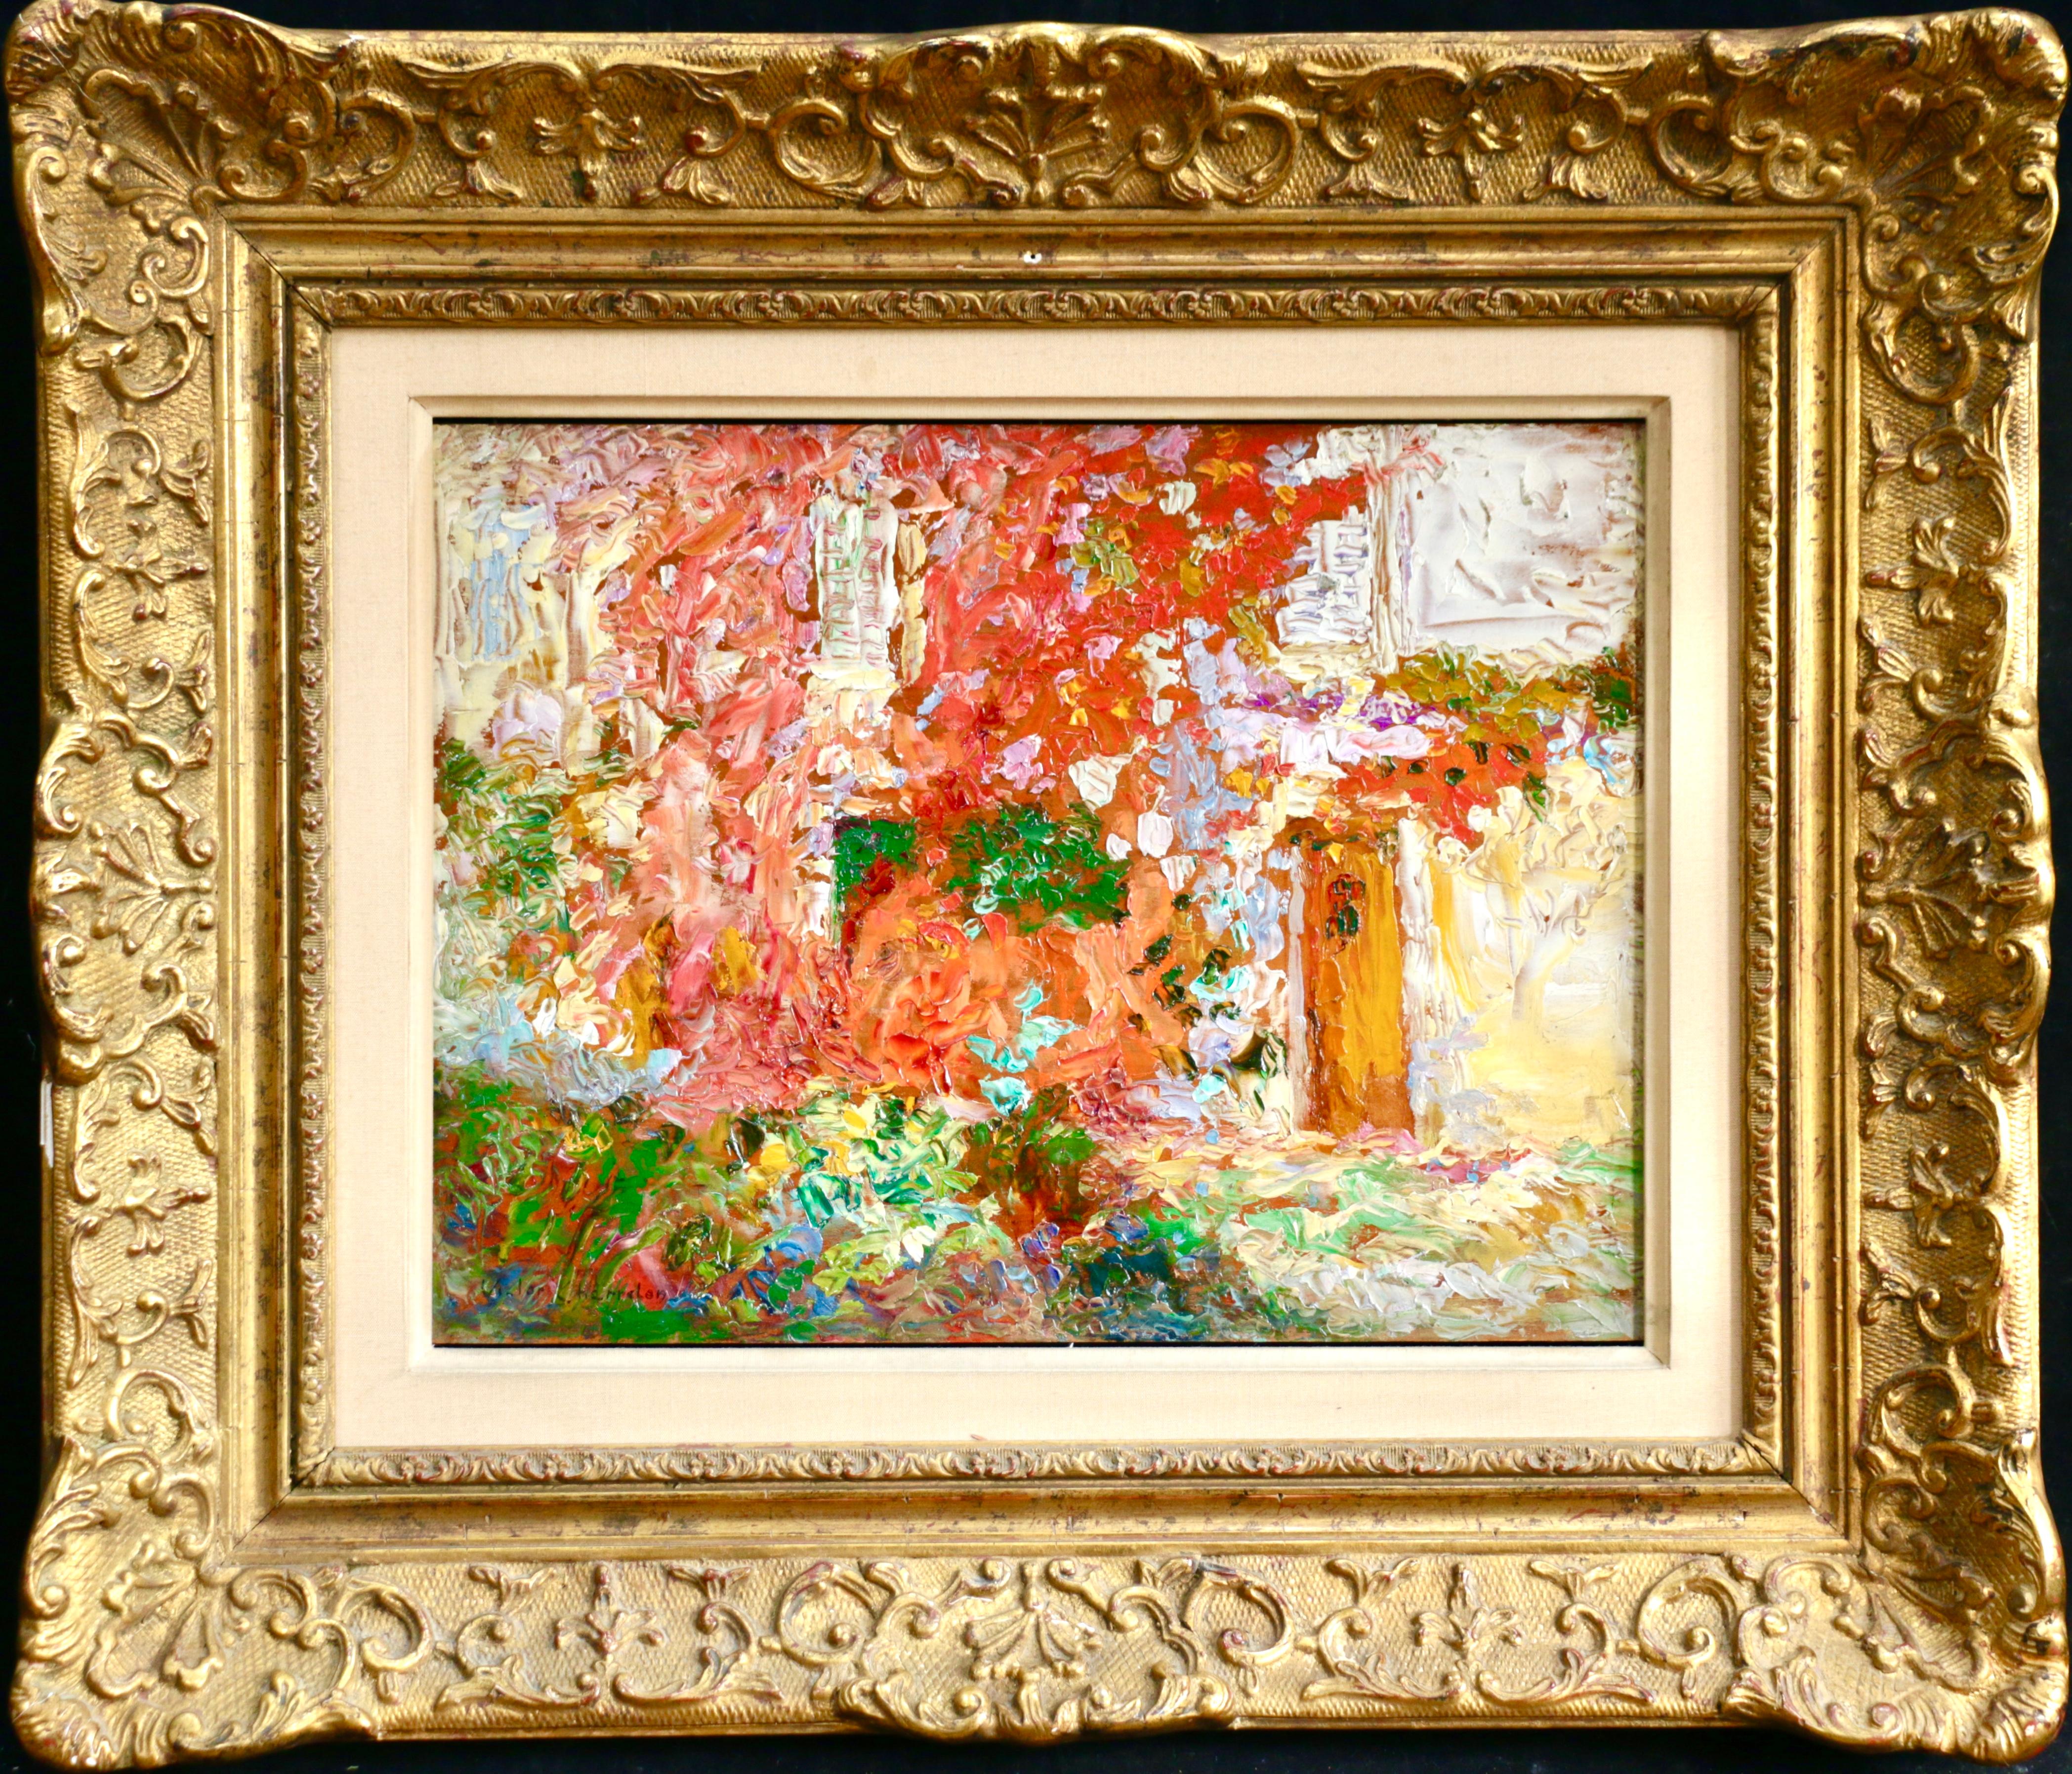 Oil on panel by Victor Charreton. Signed lower left. Framed dimensions are 18.5 inches high by 21.5 inches wide.

Charreton was a landscape artist in the Lyons tradition with a love of sensual impasto. In his works he seeks to capture fleeting,